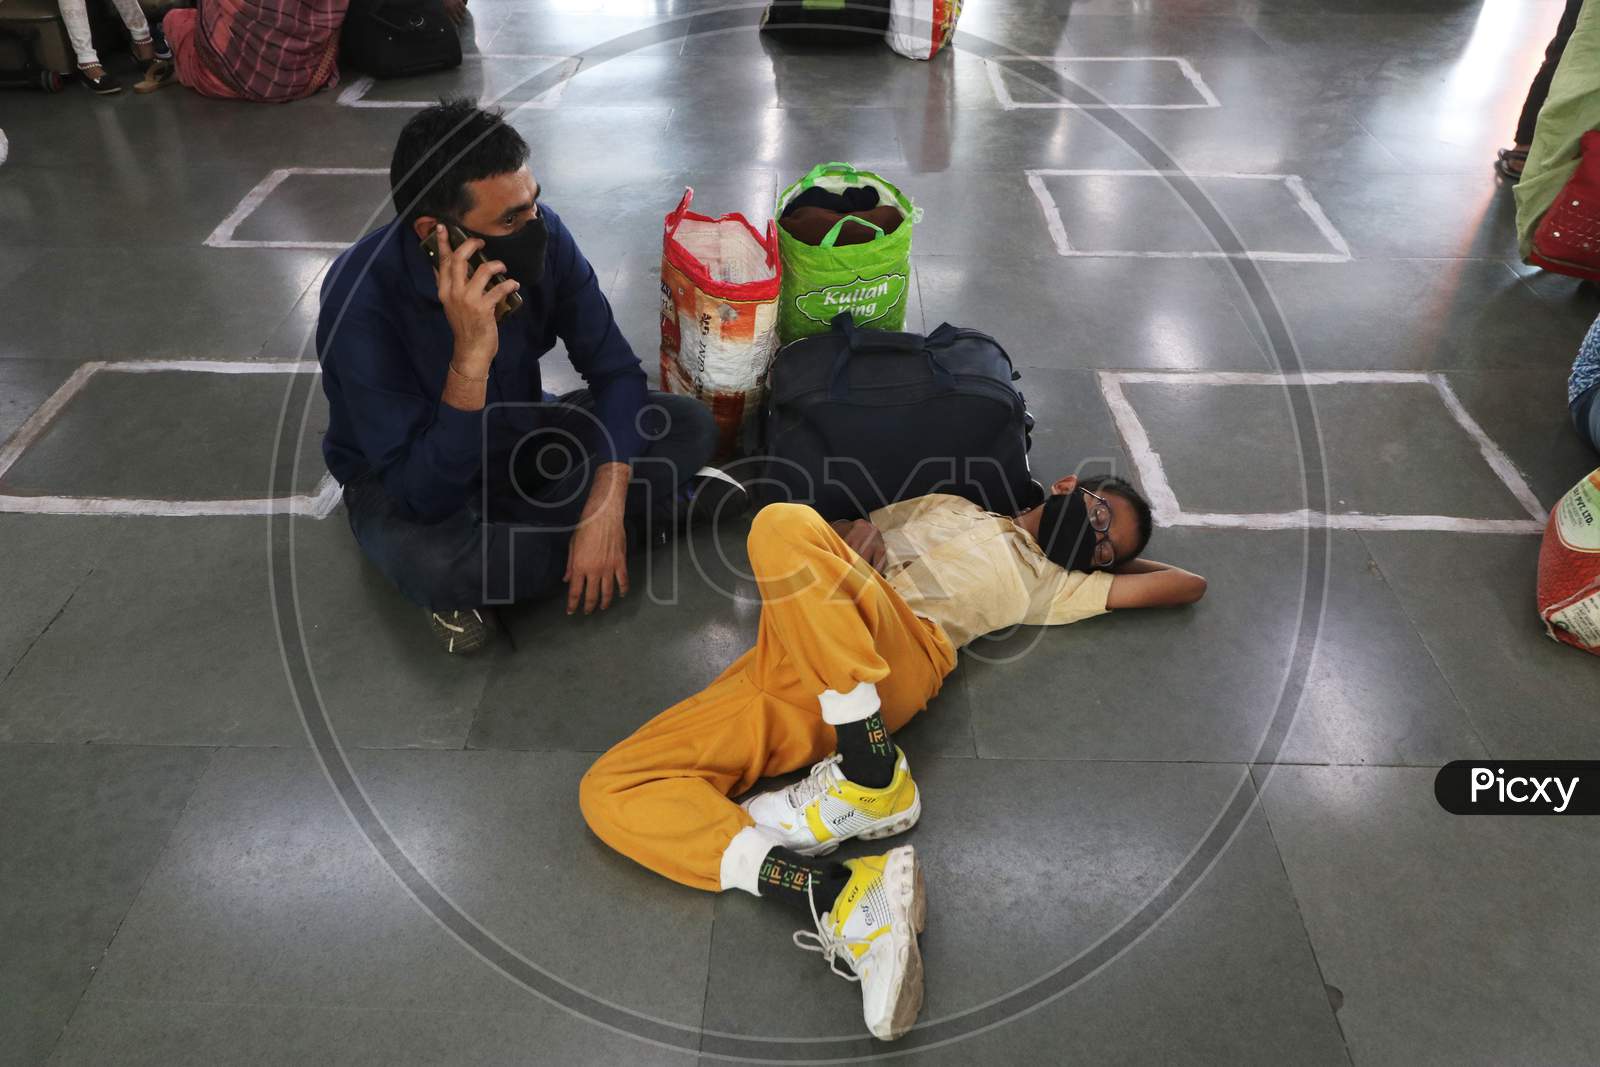 People wearing protective masks wait for a train at a railway station, amid the spread of the coronavirus disease (COVID-19), in Mumbai, India, November, 2020.